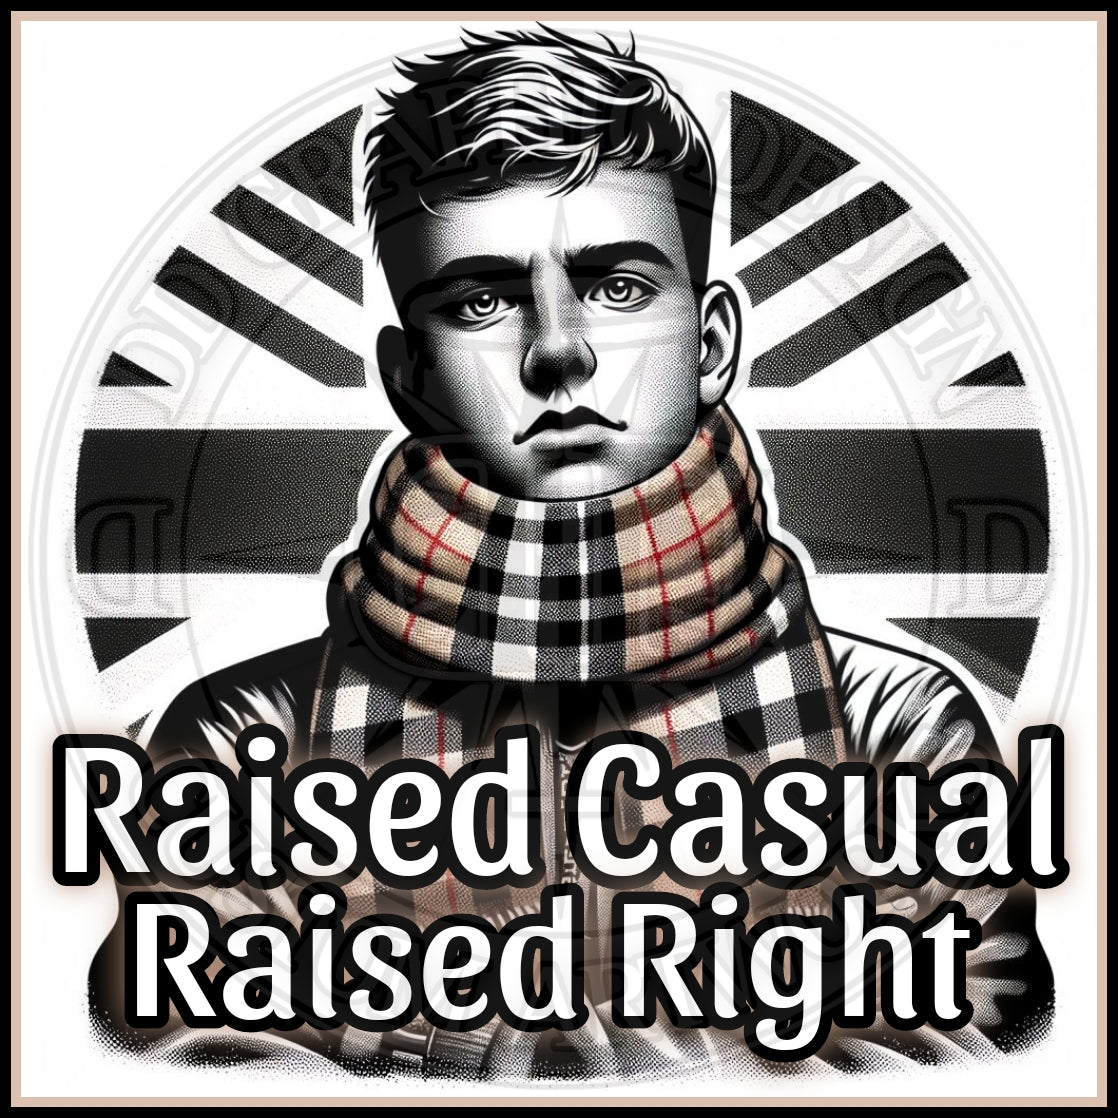 00004 - Raised Casual Raised Right - Collection